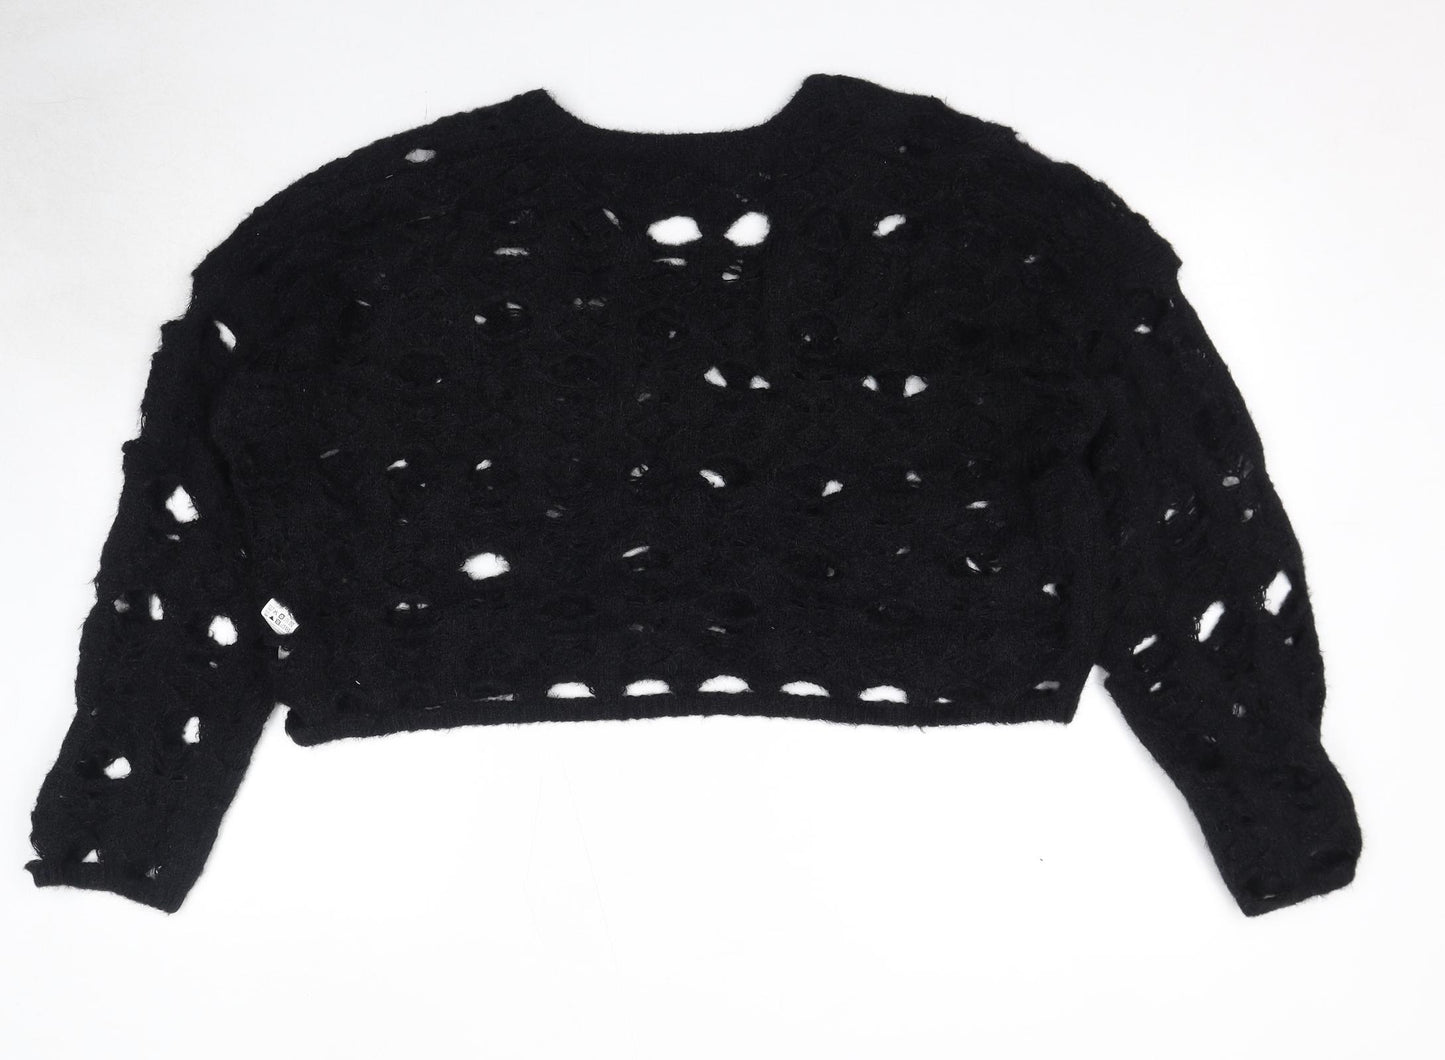 Missguided Womens Black Round Neck Acrylic Pullover Jumper Size 14 - Size 14-16